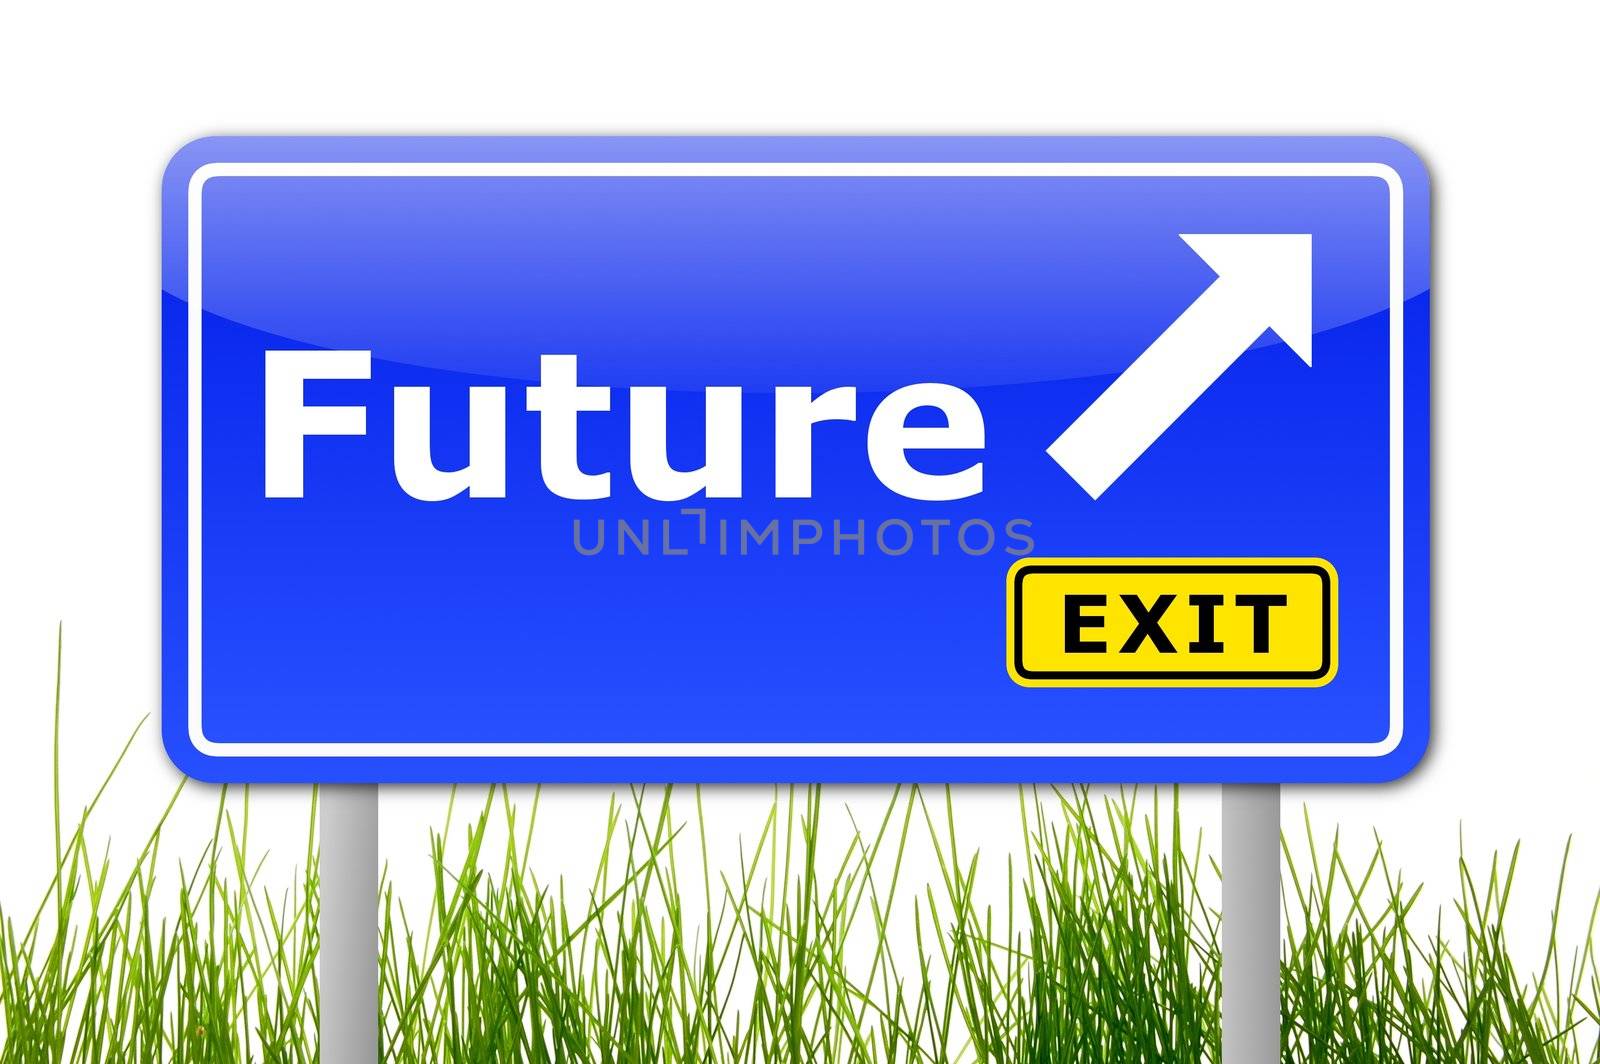 traffic sign with future and arrow showing the right direction